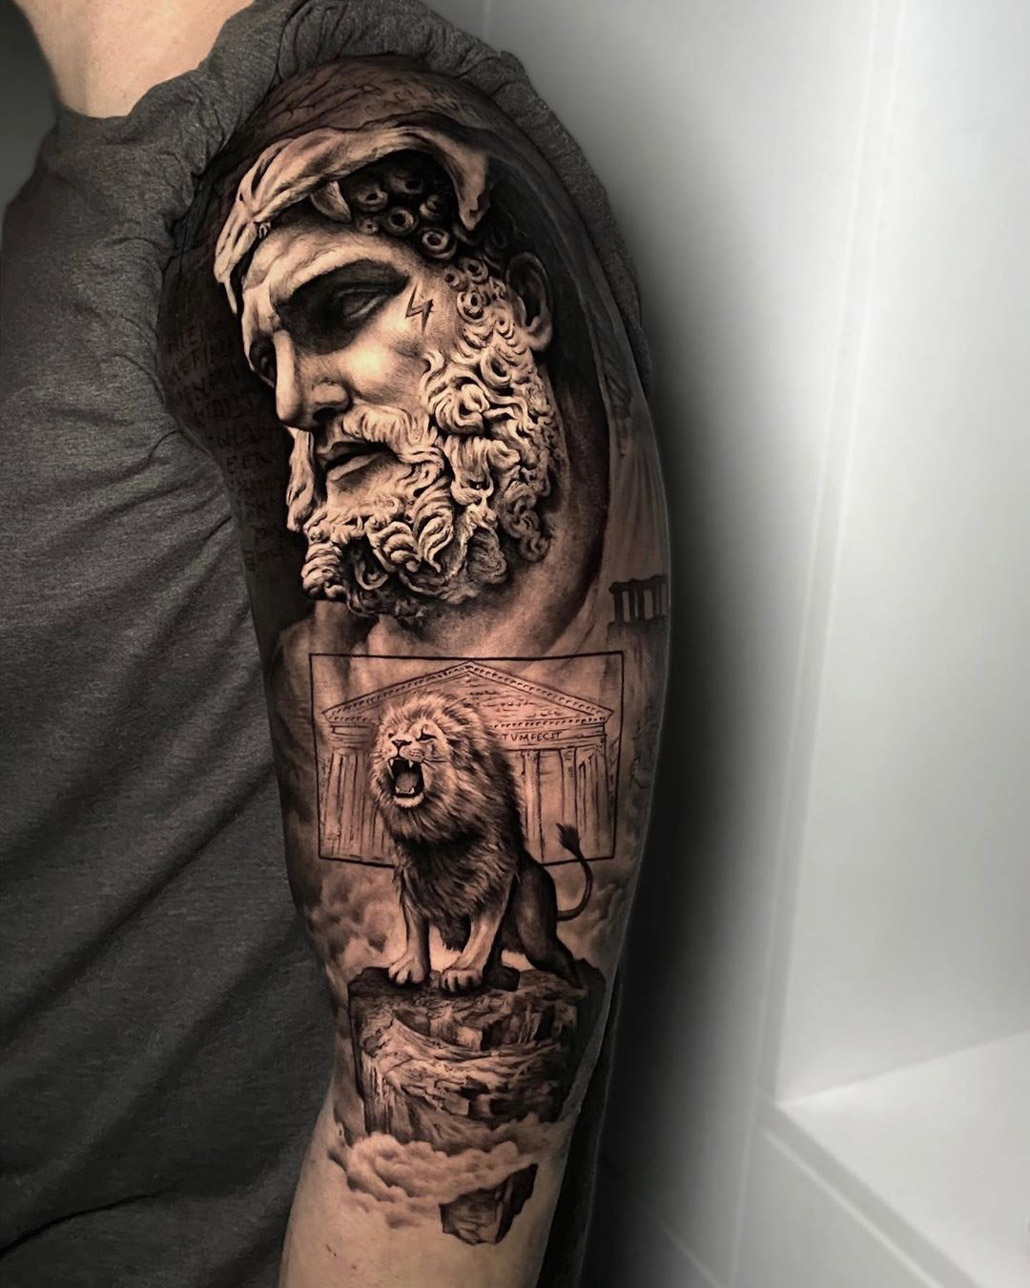 Hercules and the lion By me ig furia139  rtattoo